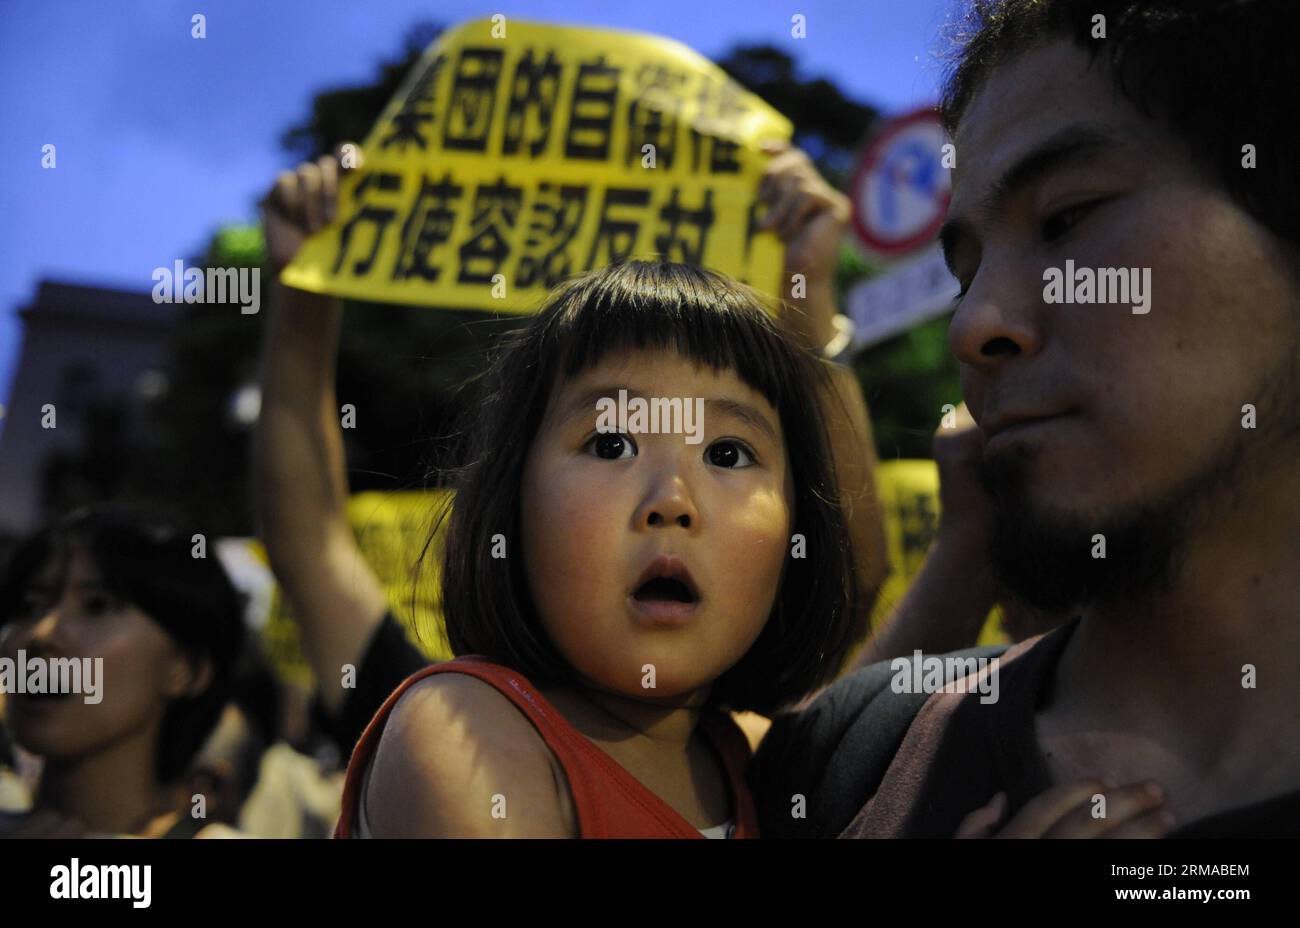 (140630) -- TOKYO, June 30, 2014 (Xinhua) -- A girl participates in a protest against the rights for collective self-defense in front of the Japanese Prime Minister s official residence in Tokyo, Japan, June 30, 2014. The Japanese government sought to get a green light from the Cabinet on July 1 for a resolution that will allow Japan to exercise collective self-defense rights through reinterpreting the country s pacifist Constitution. (Xinhua/Stringer) (dzl) JAPAN-TOKYO-COLLECTIVE DEFENSE PUBLICATIONxNOTxINxCHN   Tokyo June 30 2014 XINHUA a Girl participates in a Protest against The Rights for Stock Photo